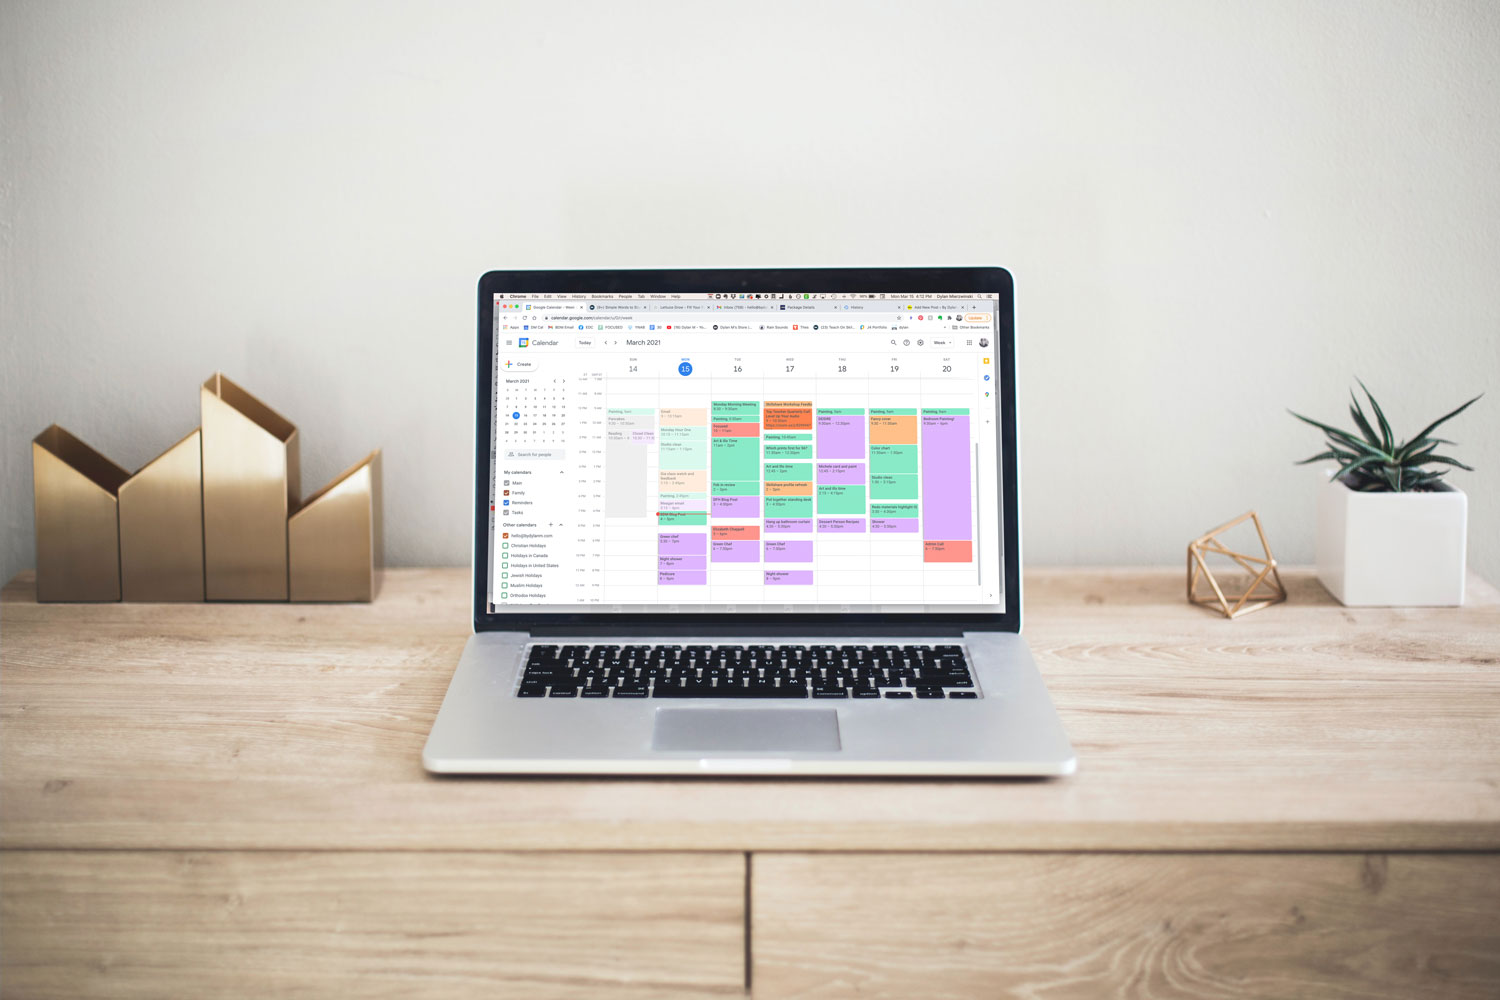 open laptop on desk with full week of google calendar schedule visible